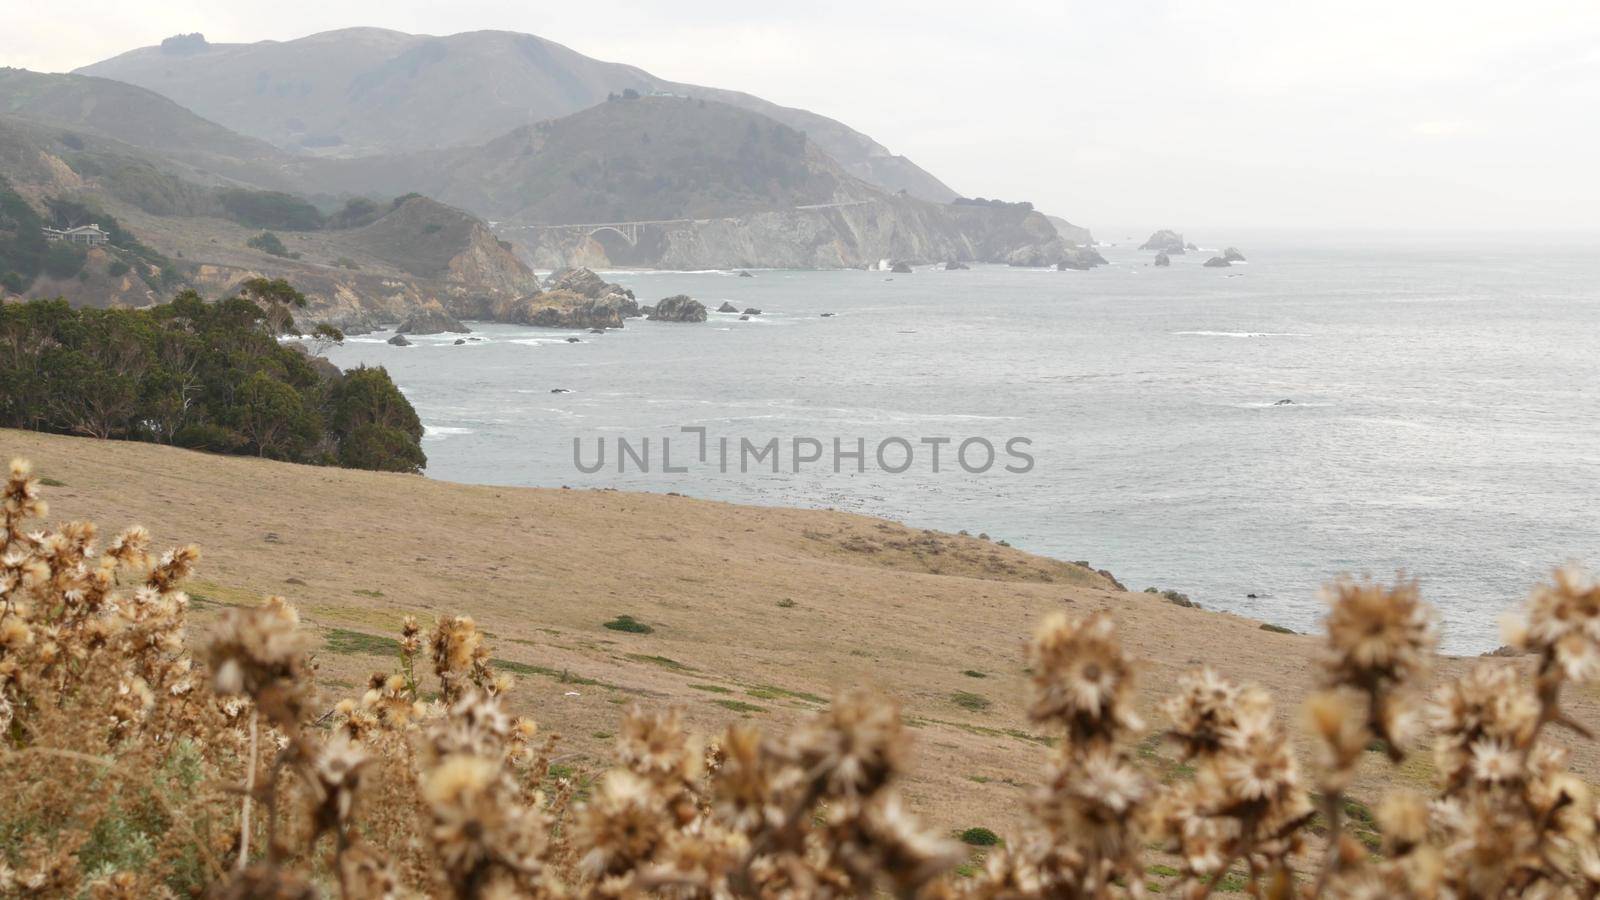 Bixby creek bridge, rocky craggy ocean, cliff or steep bluff, foggy misty weather. Sea water waves on beach. California landscape, Big Sur nature, USA. Pacific coast highway 1, cabrillo scenic road.